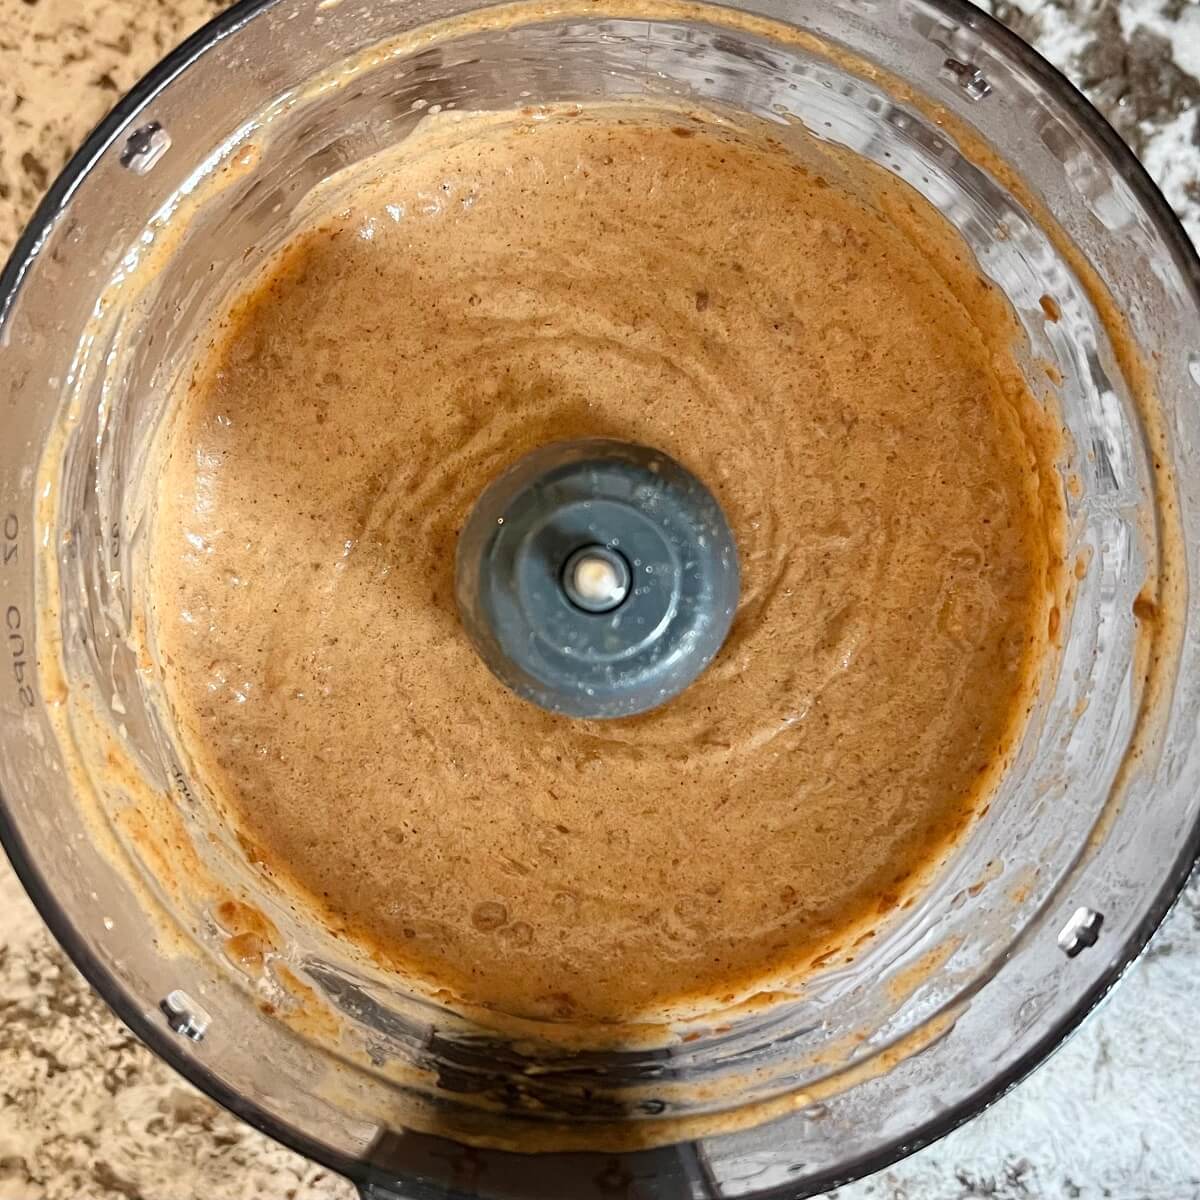 Caramel sauce blended in a food processor.